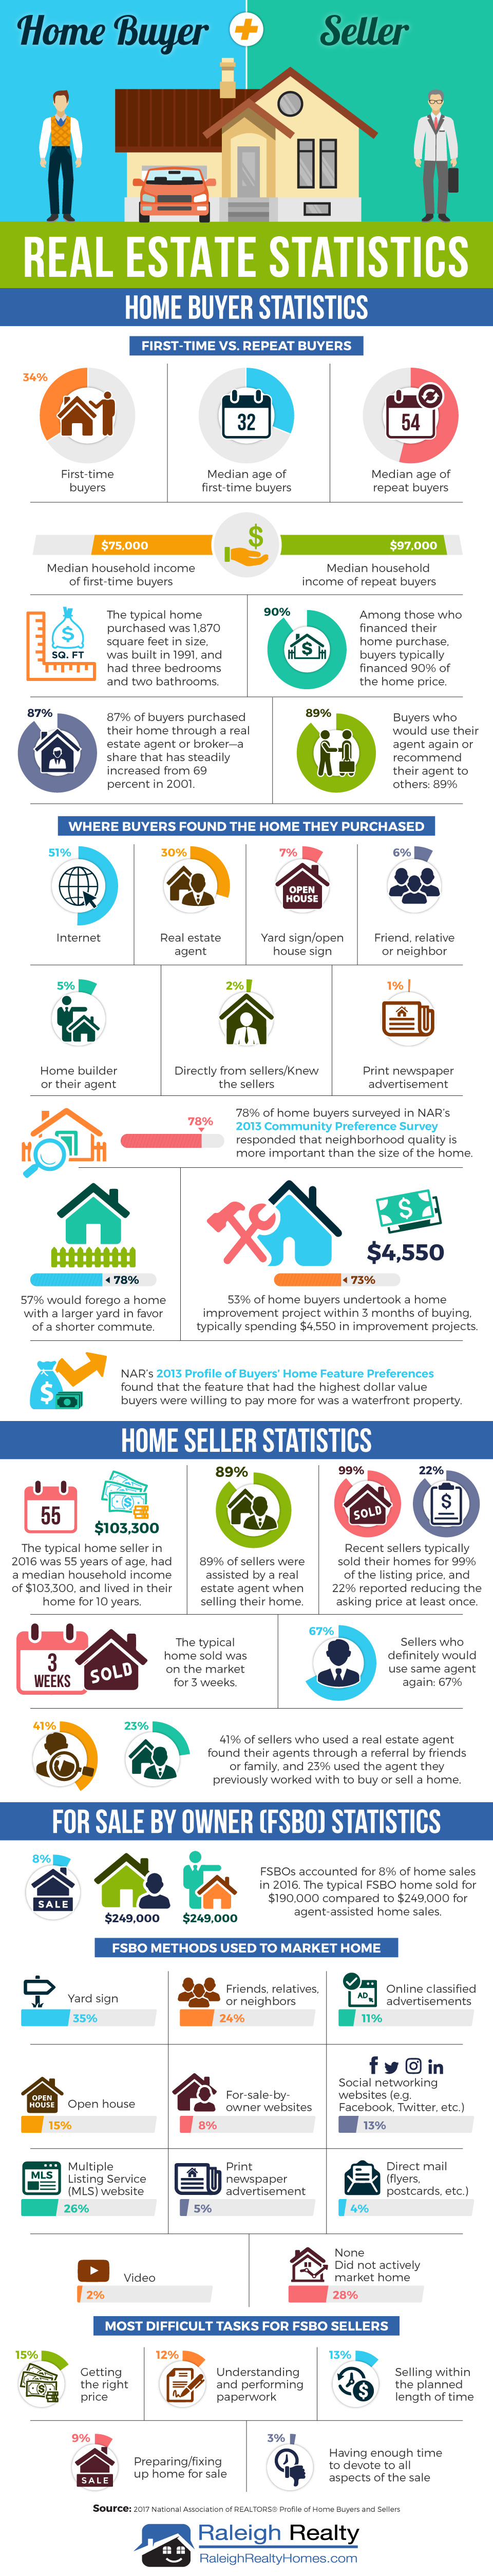 Real Estate Statistics for Home Buyers and Sellers